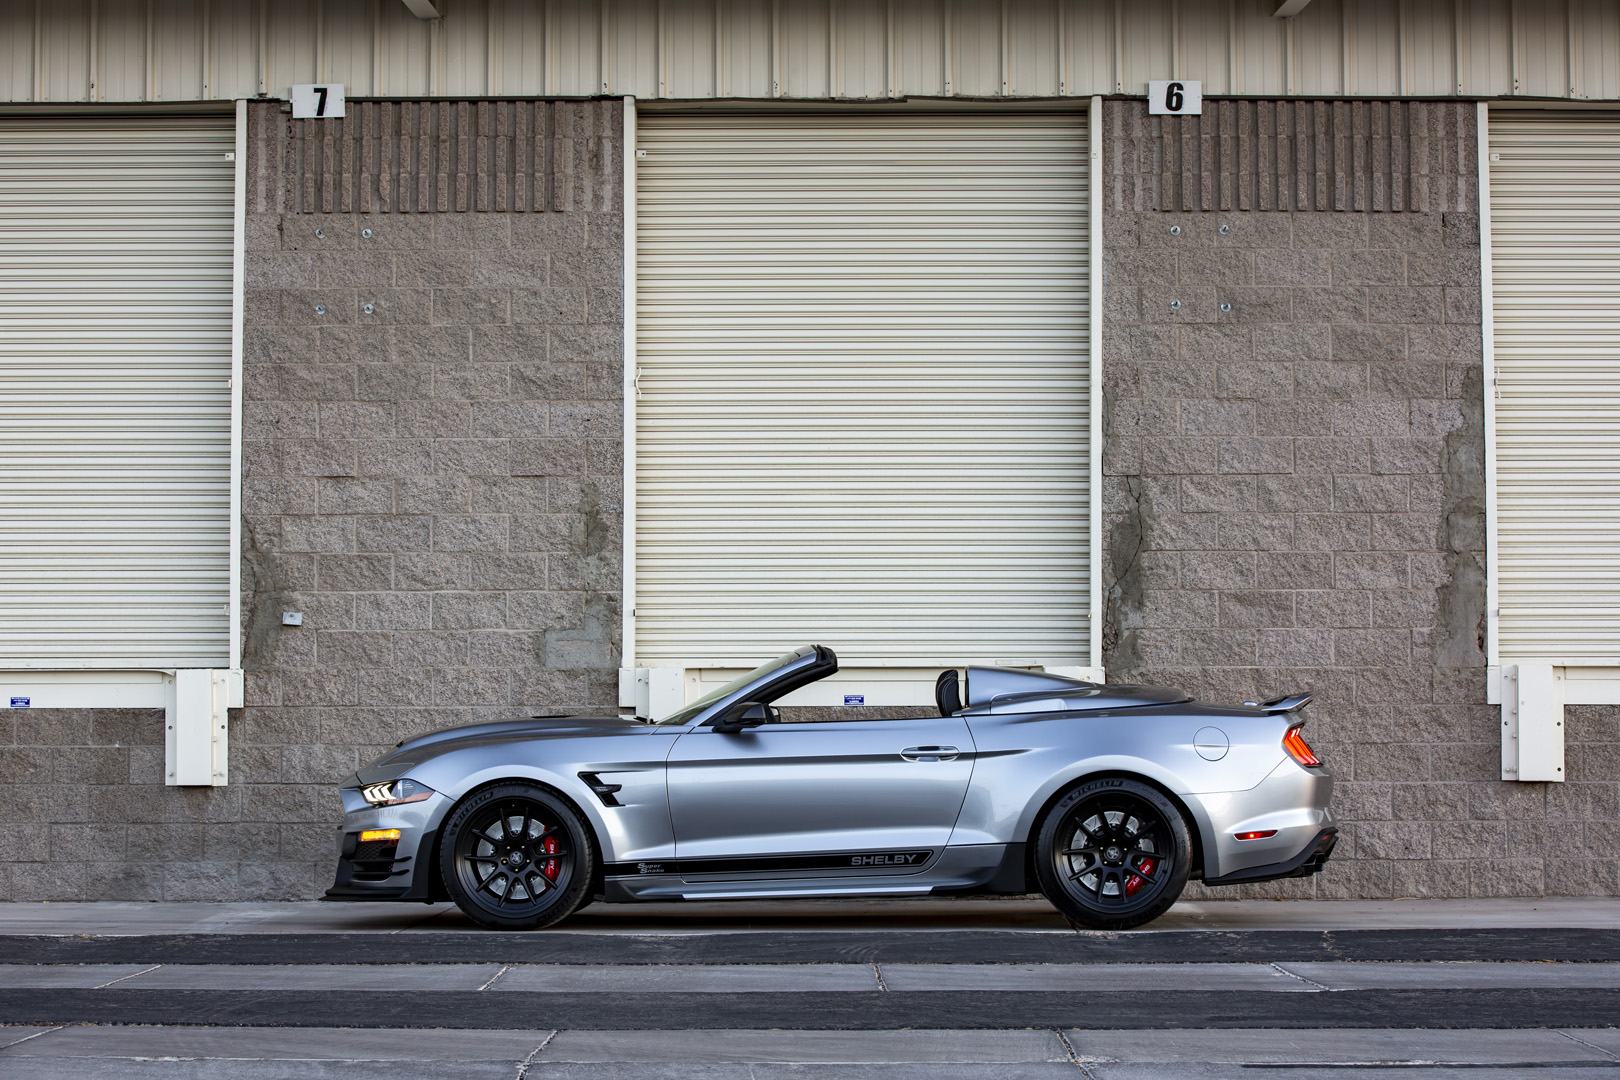 A Ford Mustang-based Shelby Supersnake in silver